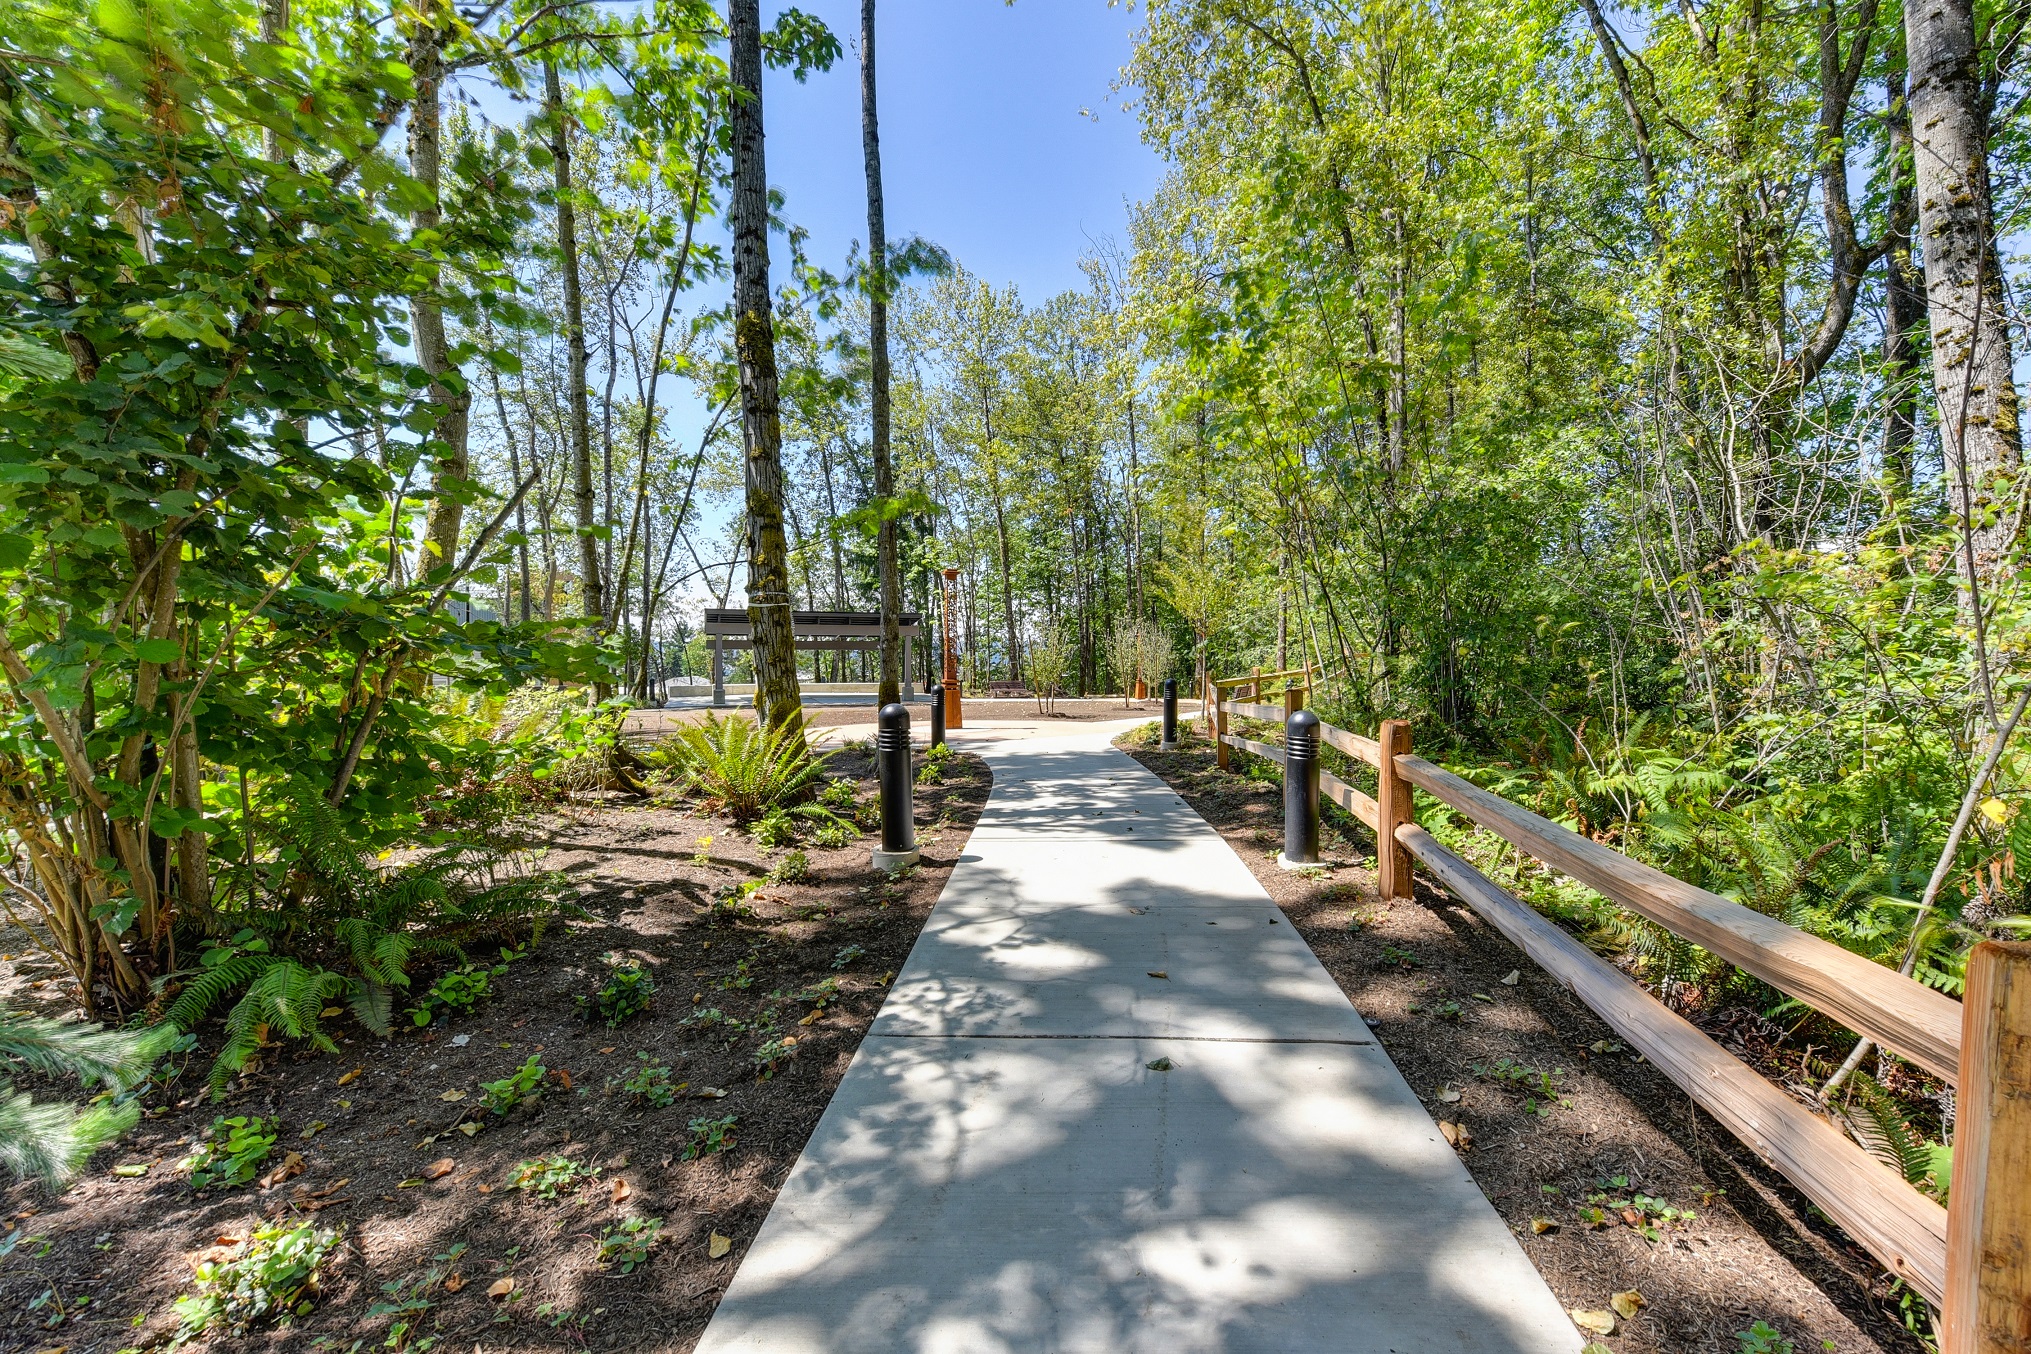 Walking Trail with Cement Path,  Wood Chip Ground, Trees, and Wooden Fence